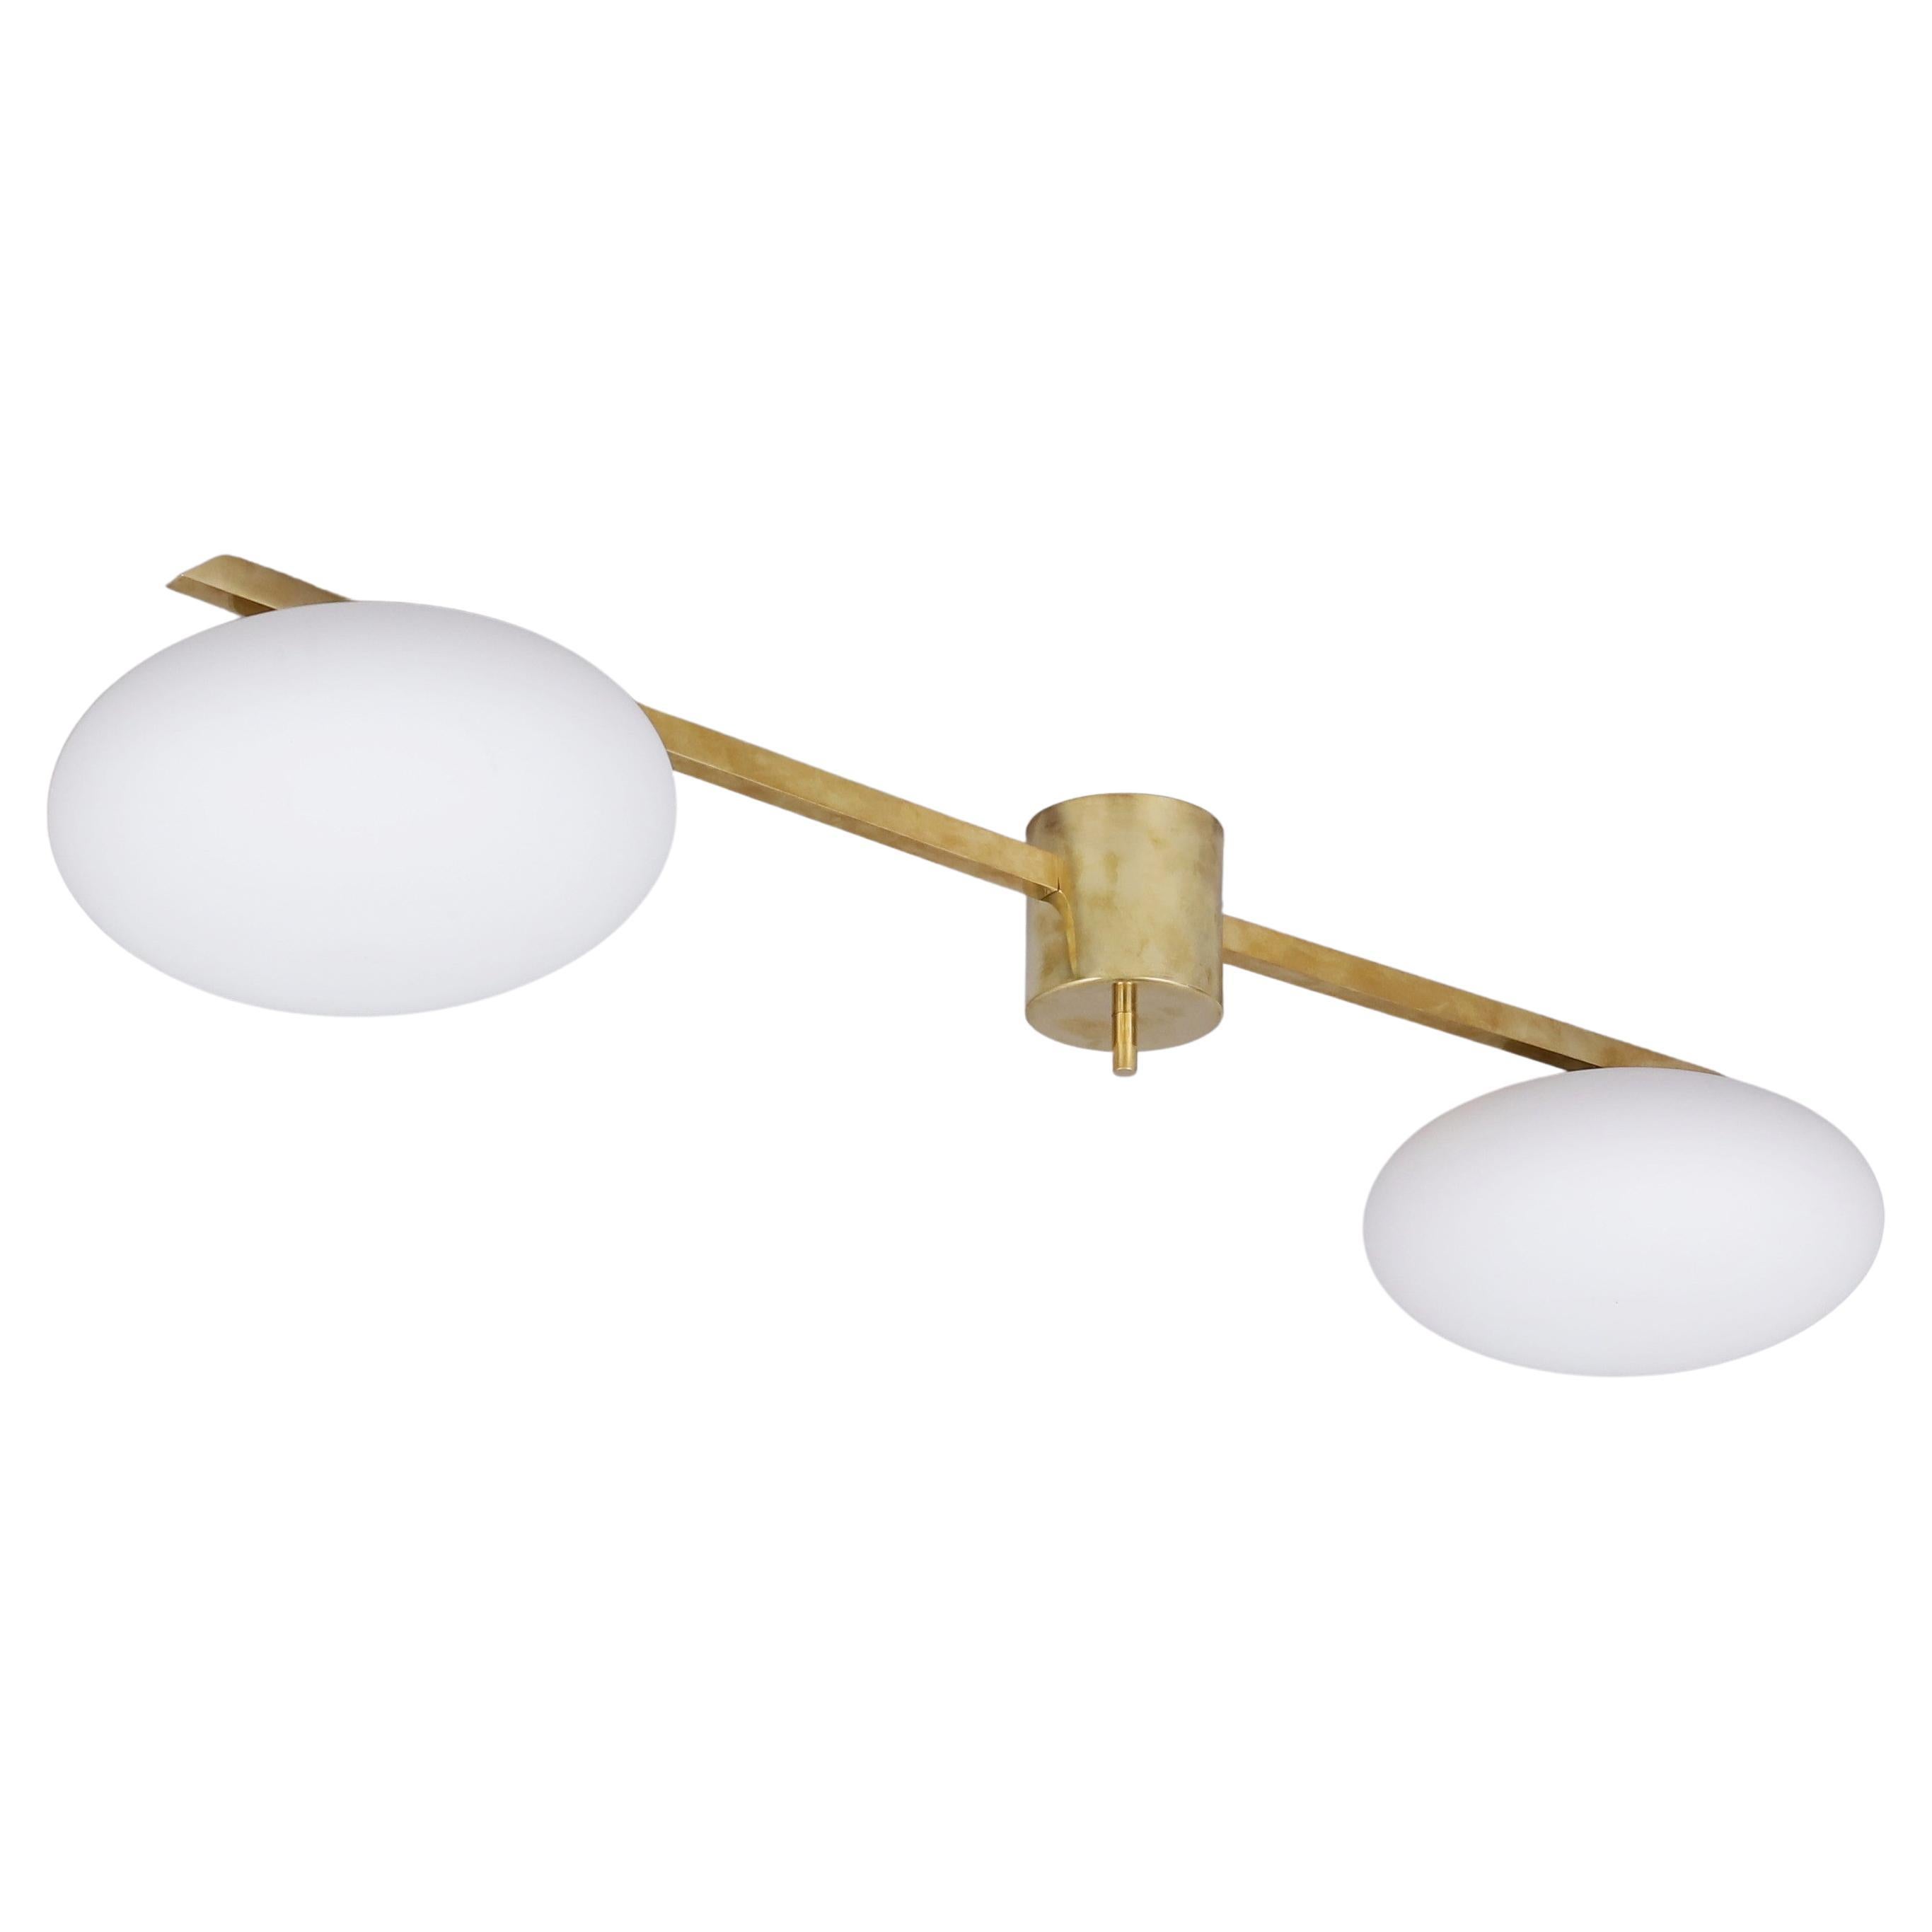 Ceiling Light in Angelo Lelli style "2 luna " Italy 1990/2000s For Sale